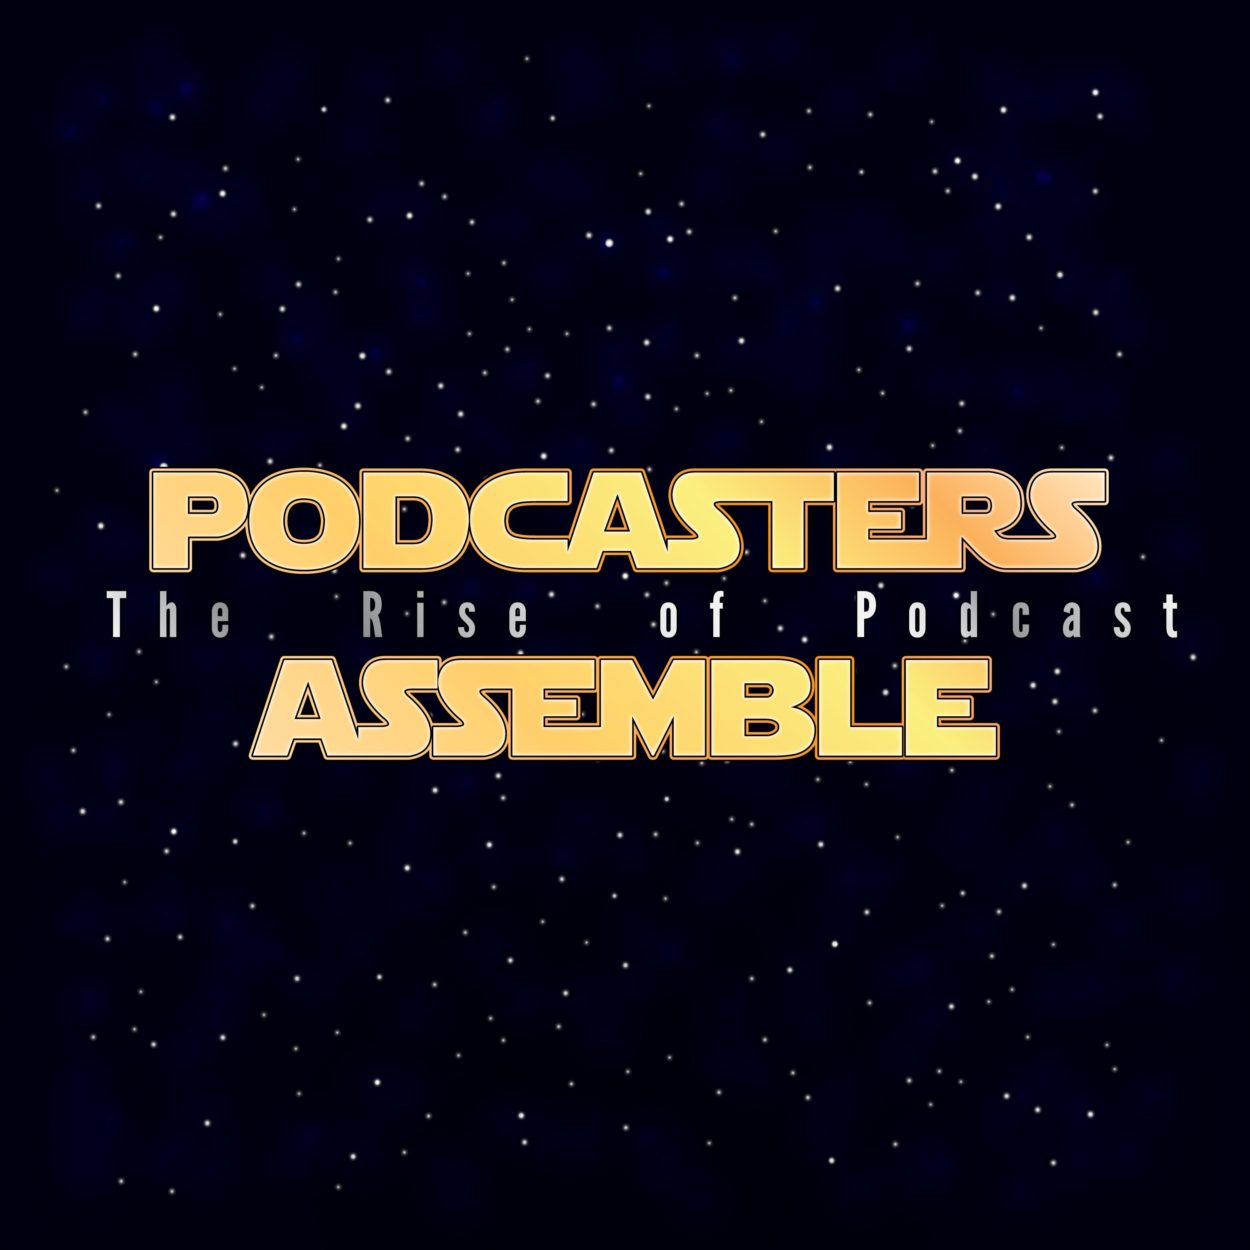 Podcasters Assemble: The Rise of Podcast - The Star Wars Season